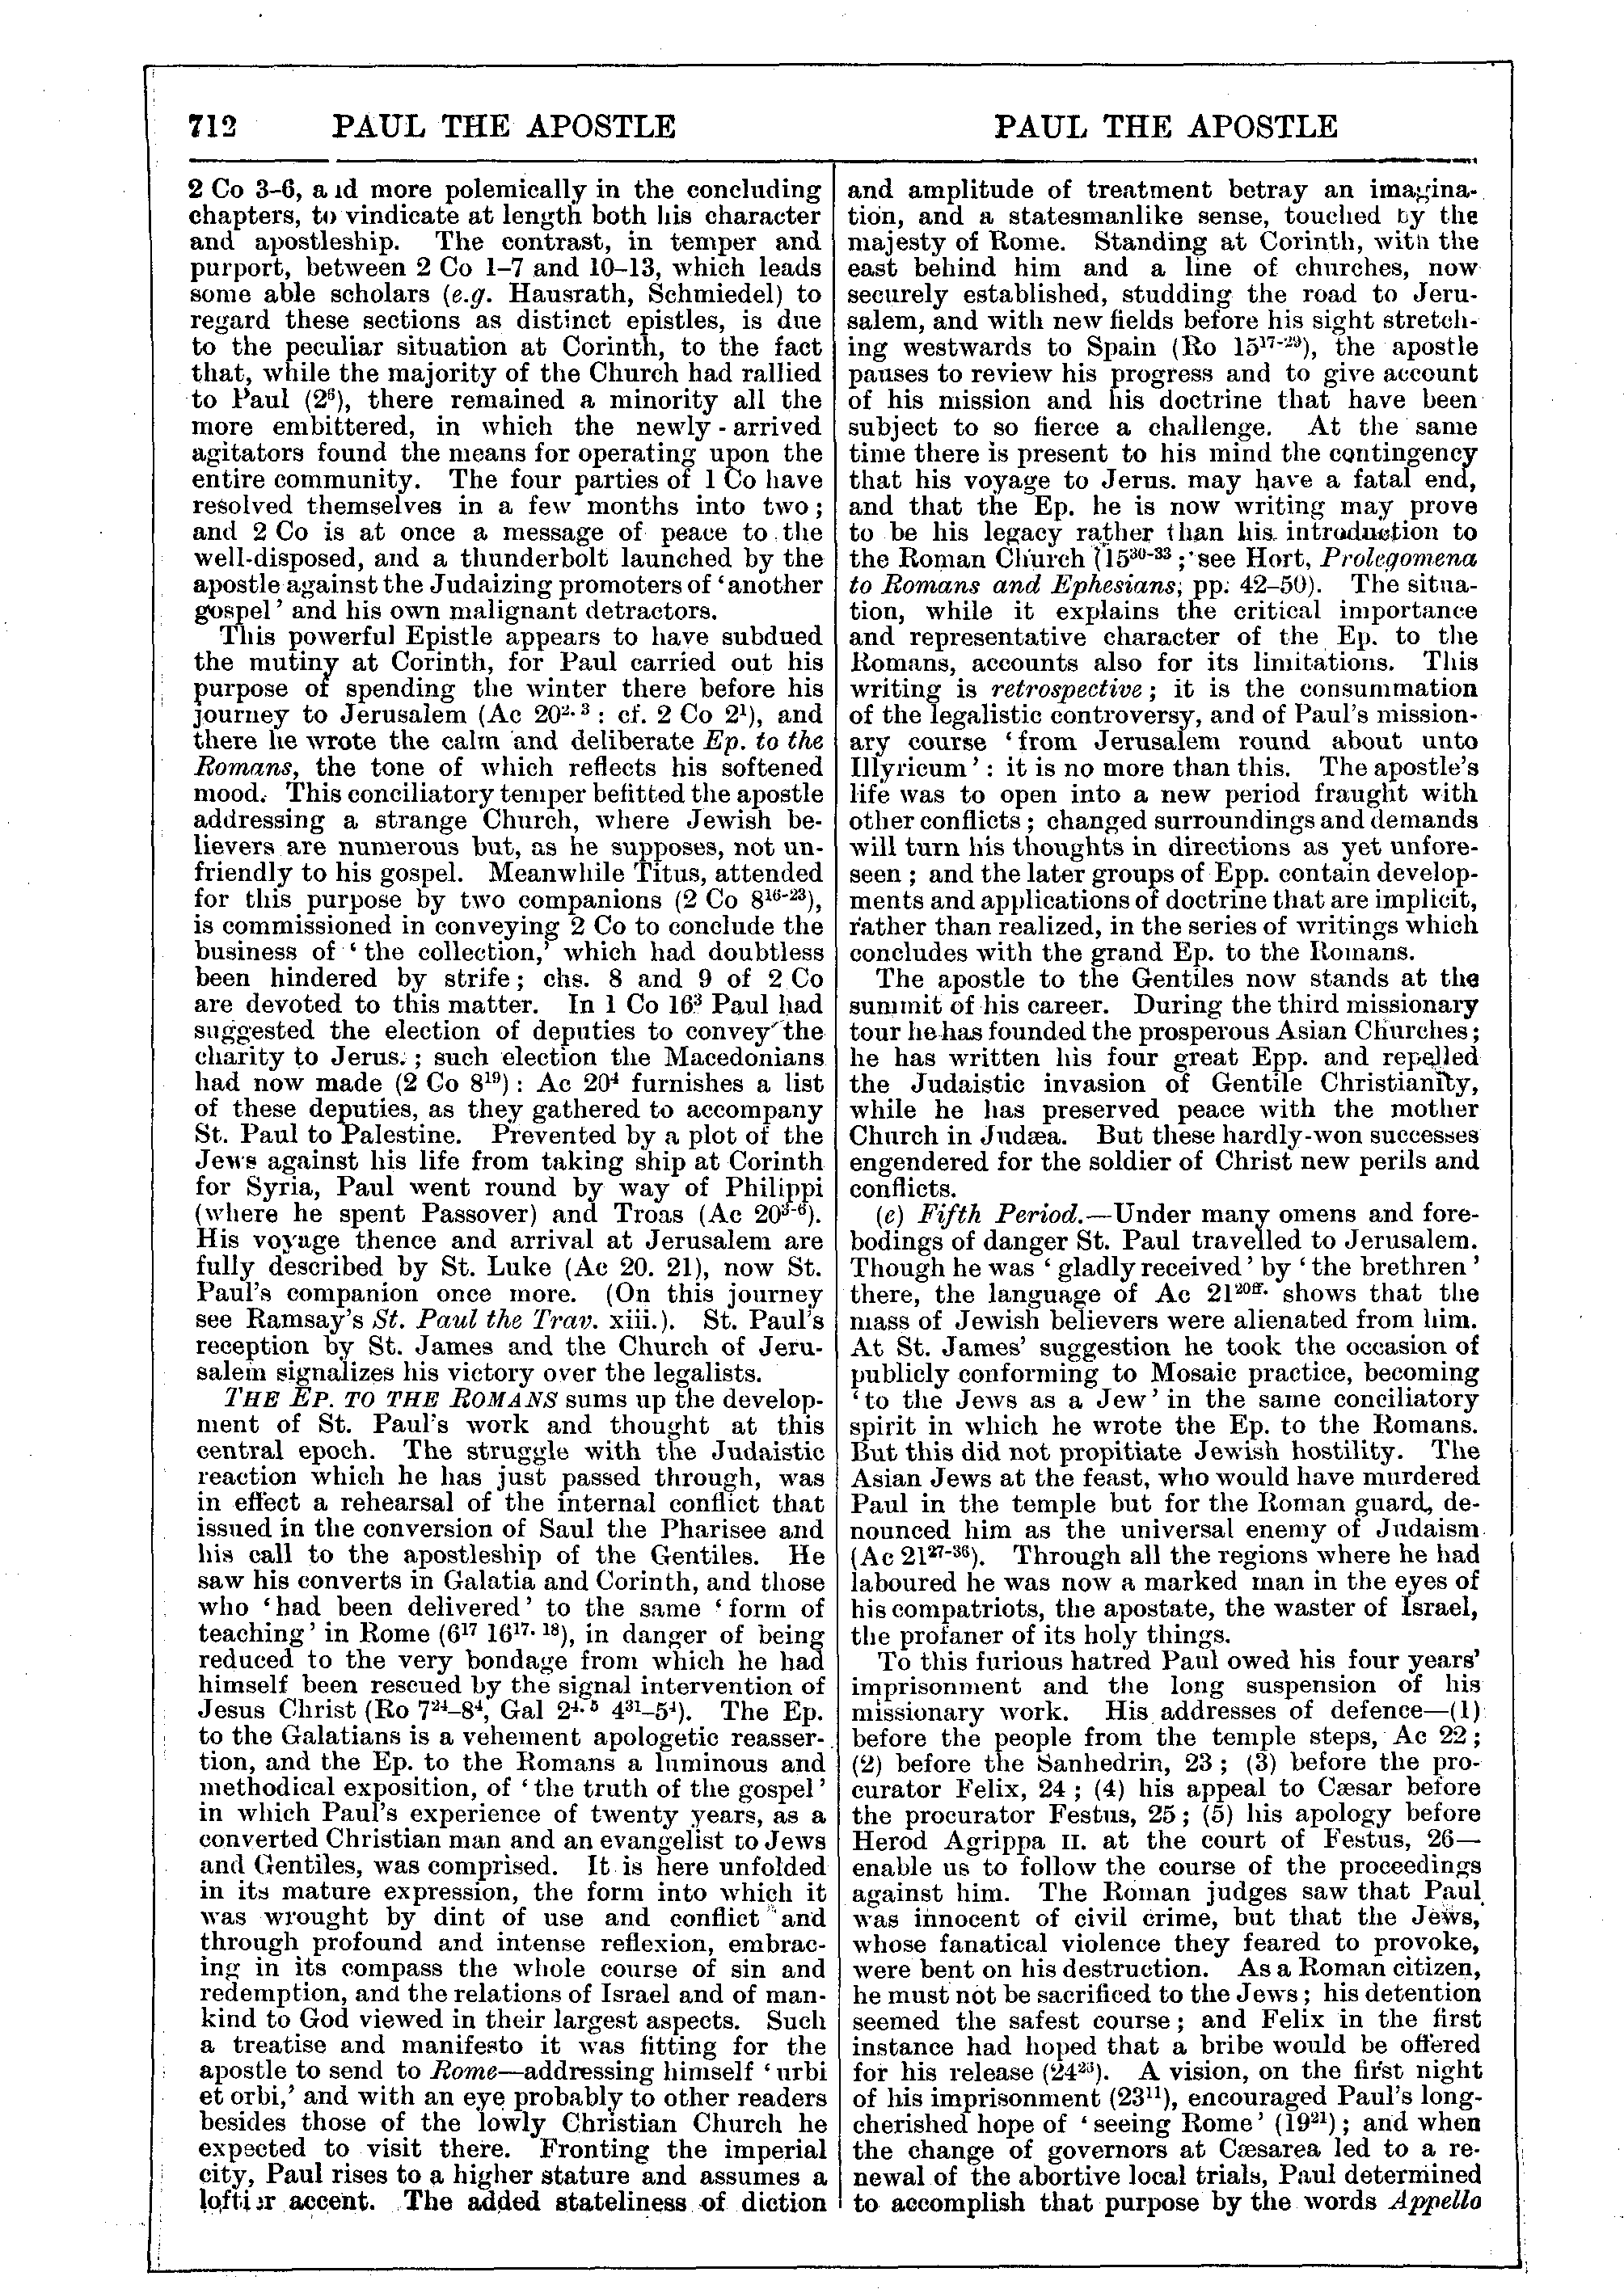 Image of page 712